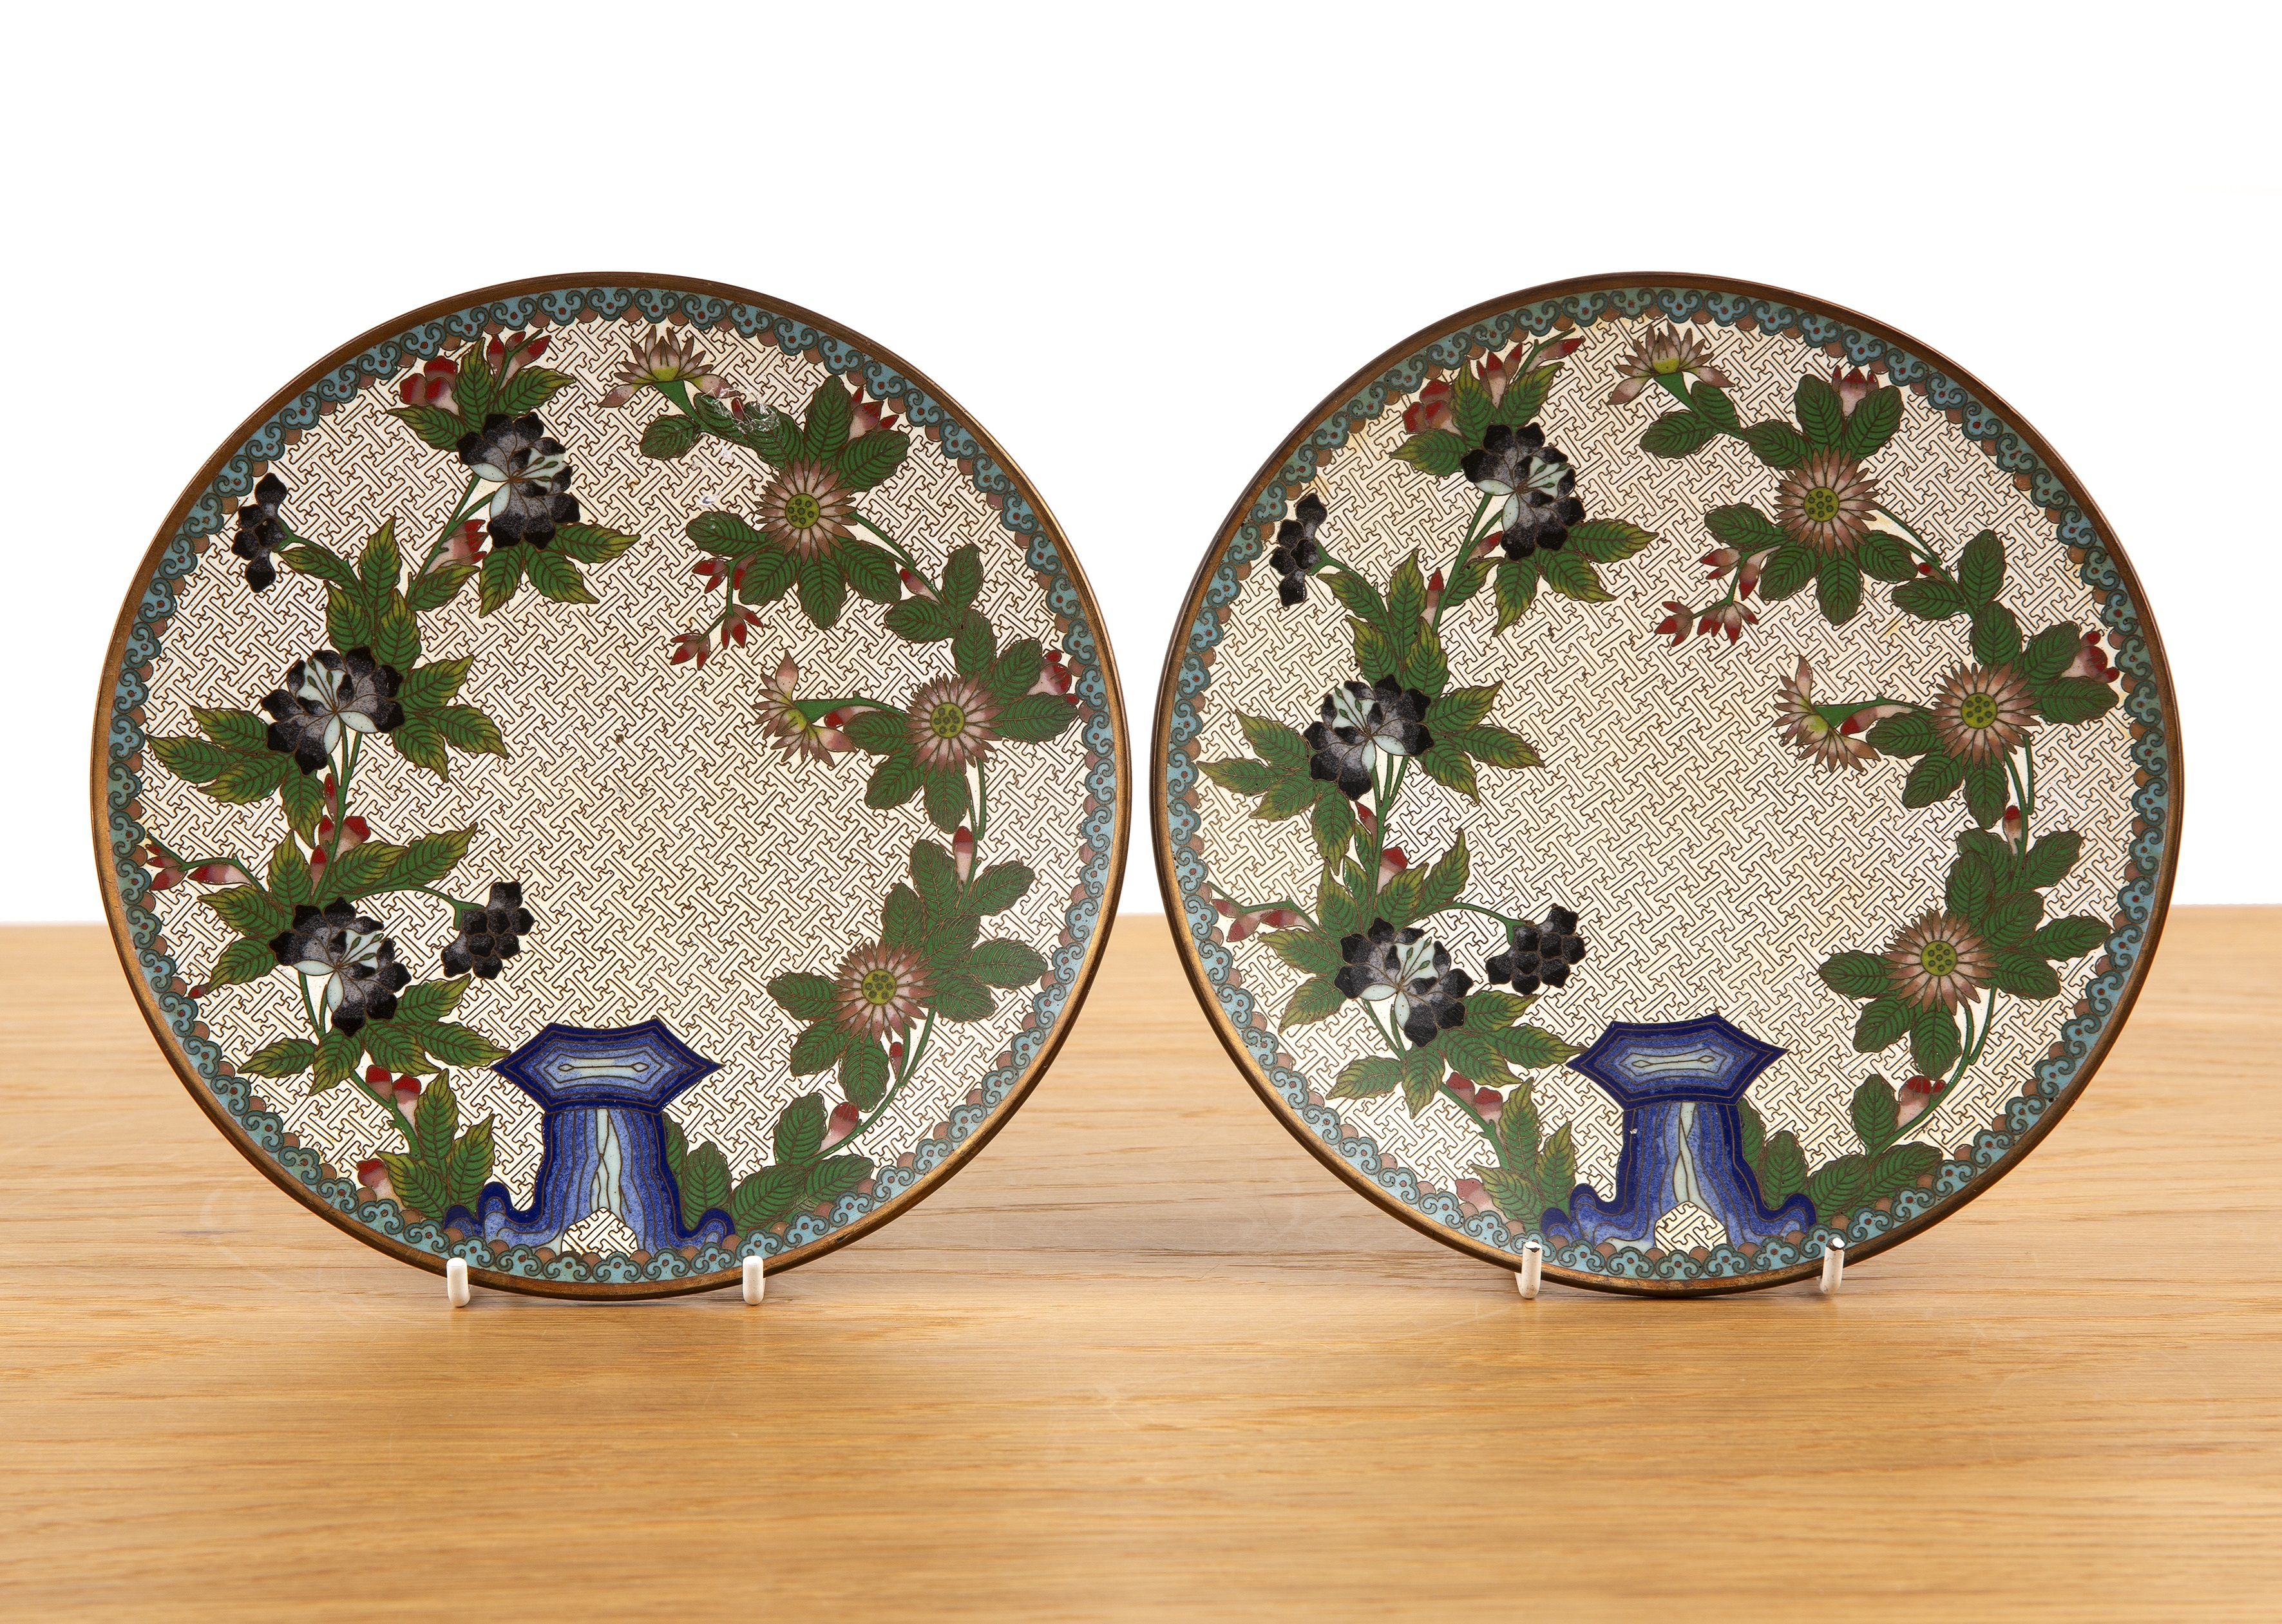 Pair of cloisonne marked dishes Chinese, 19th / early 20th Century with flower and rock work designs